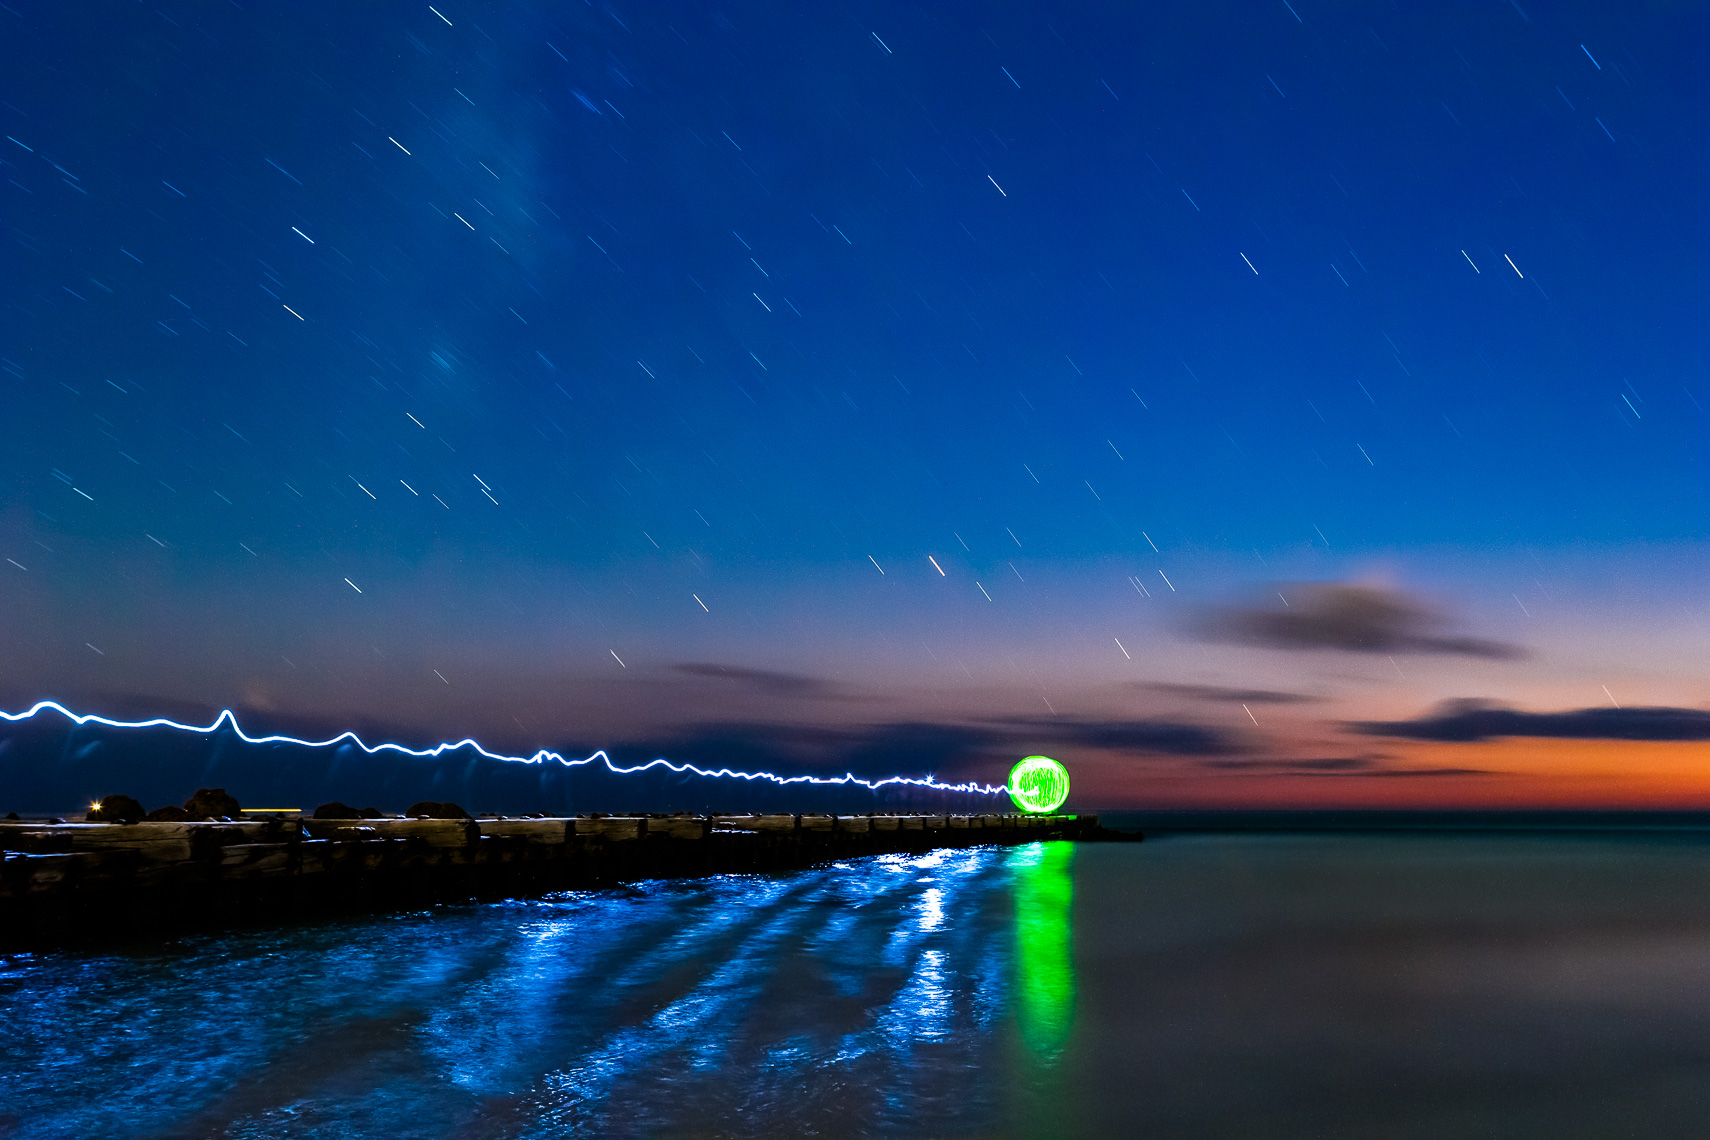 Sunset and Light Painting on the Gulf of Mexico